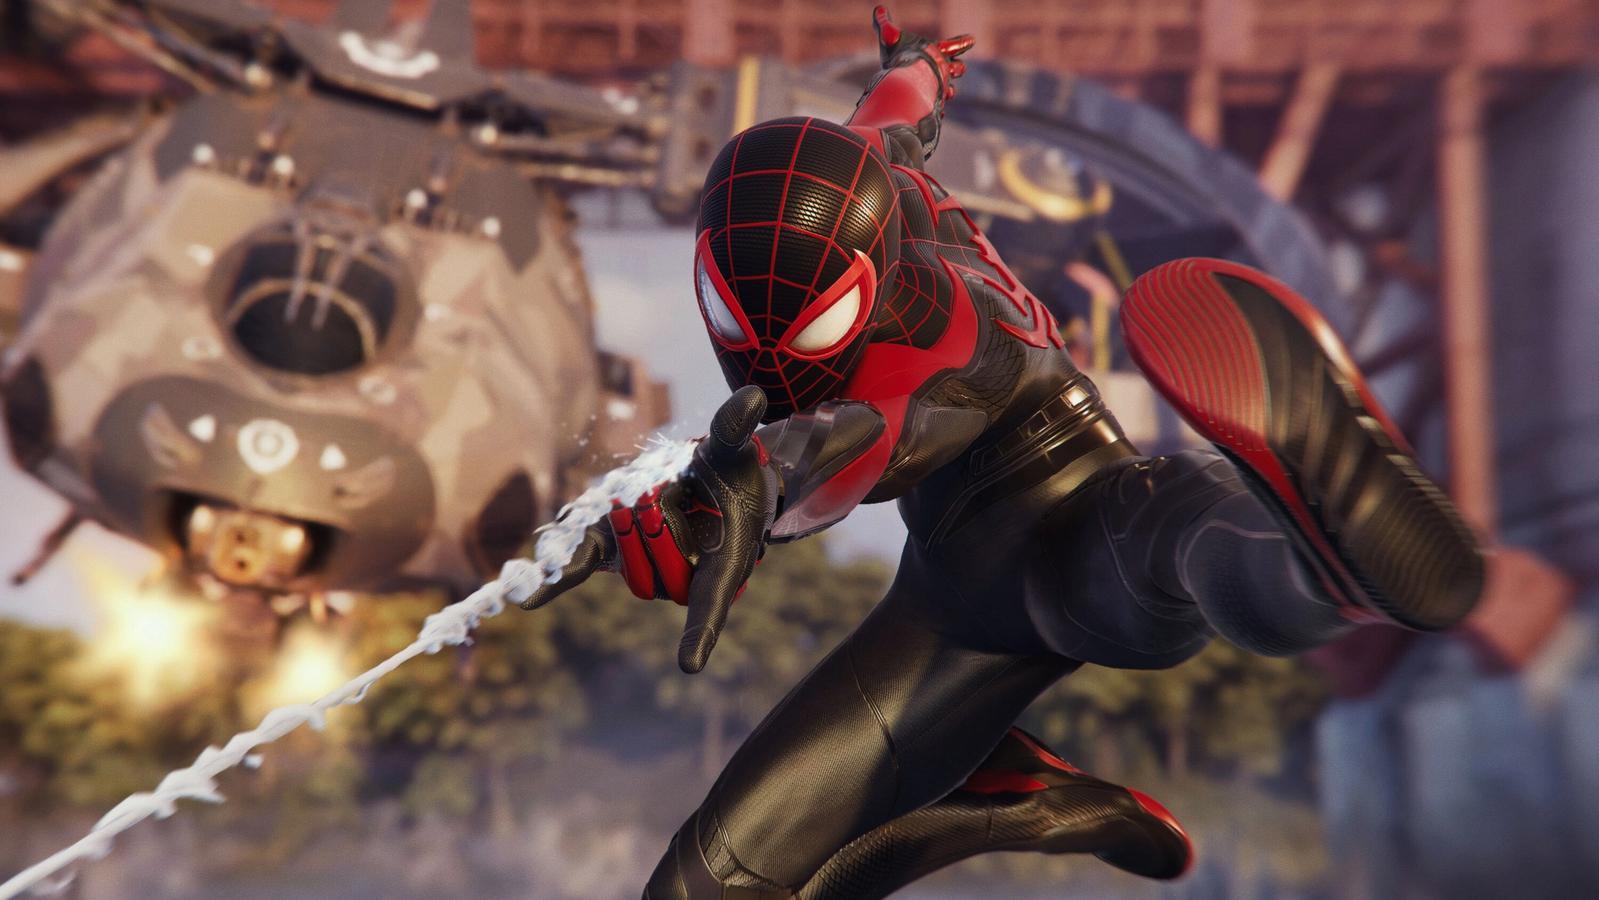 spider-man 2 miles morales swinging web at screen with helicopter in background